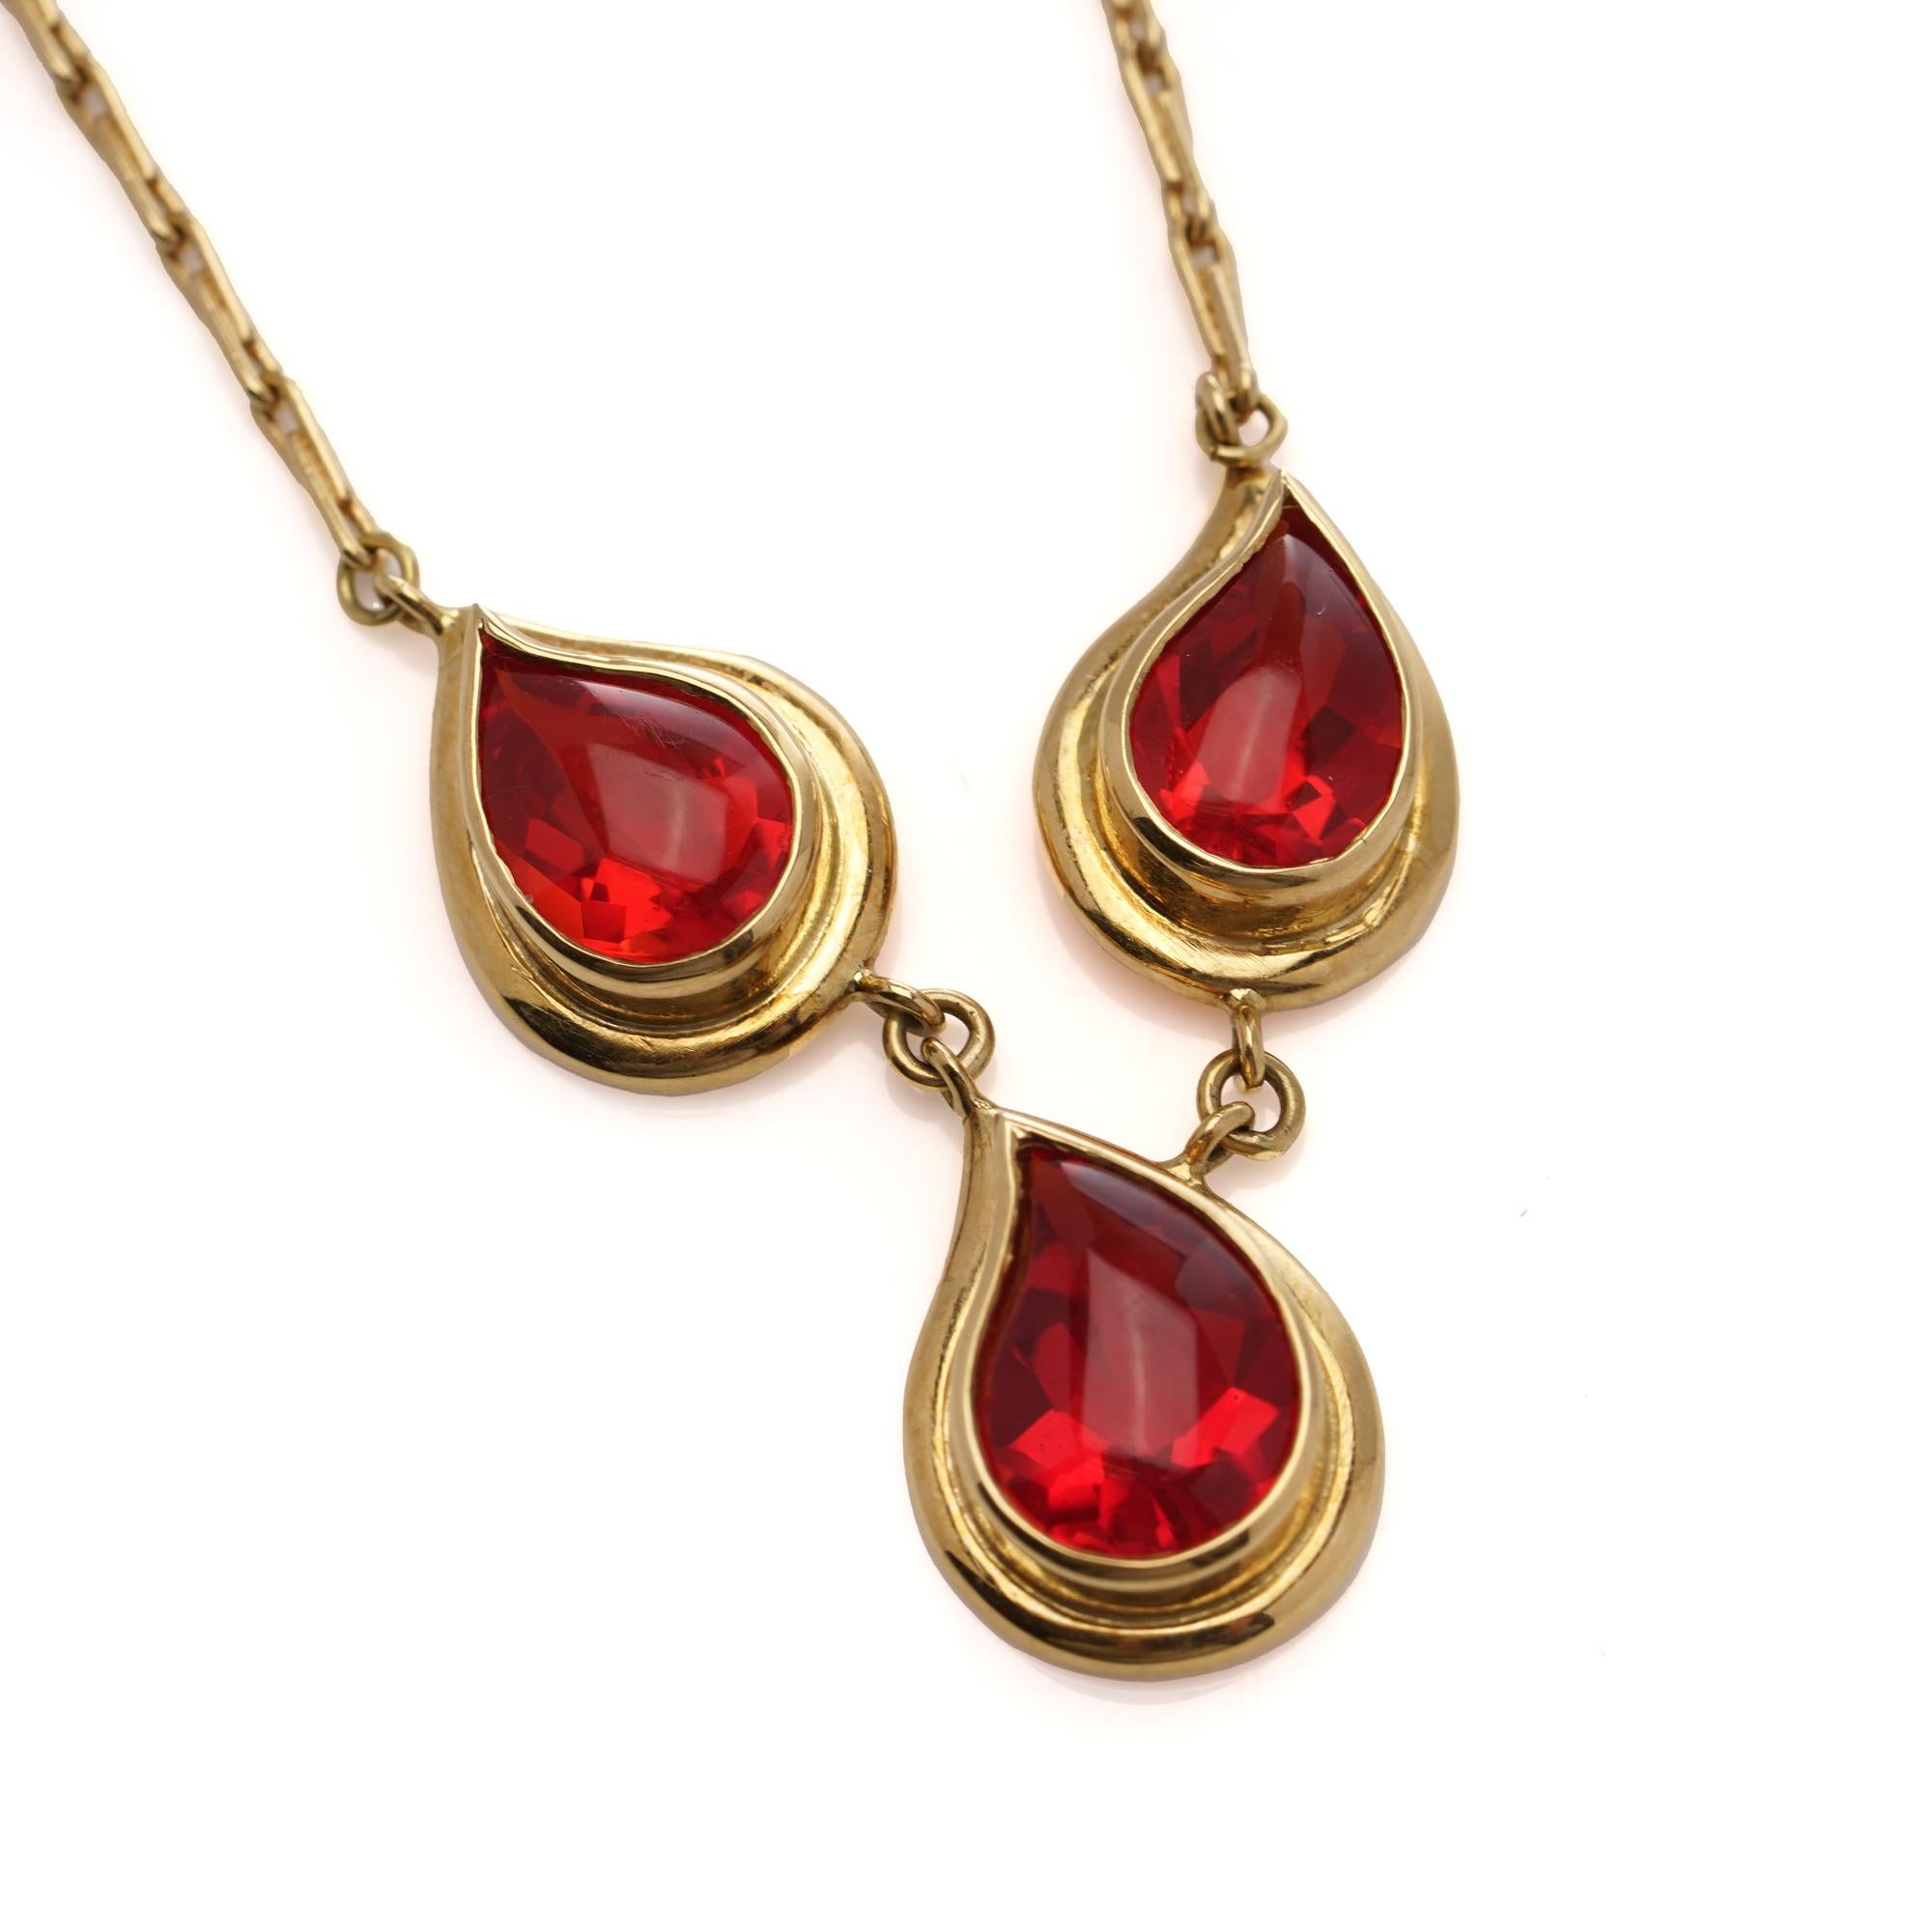 18kt gold pendant necklace featuring three tear-drop-shaped fire opals For Sale 2